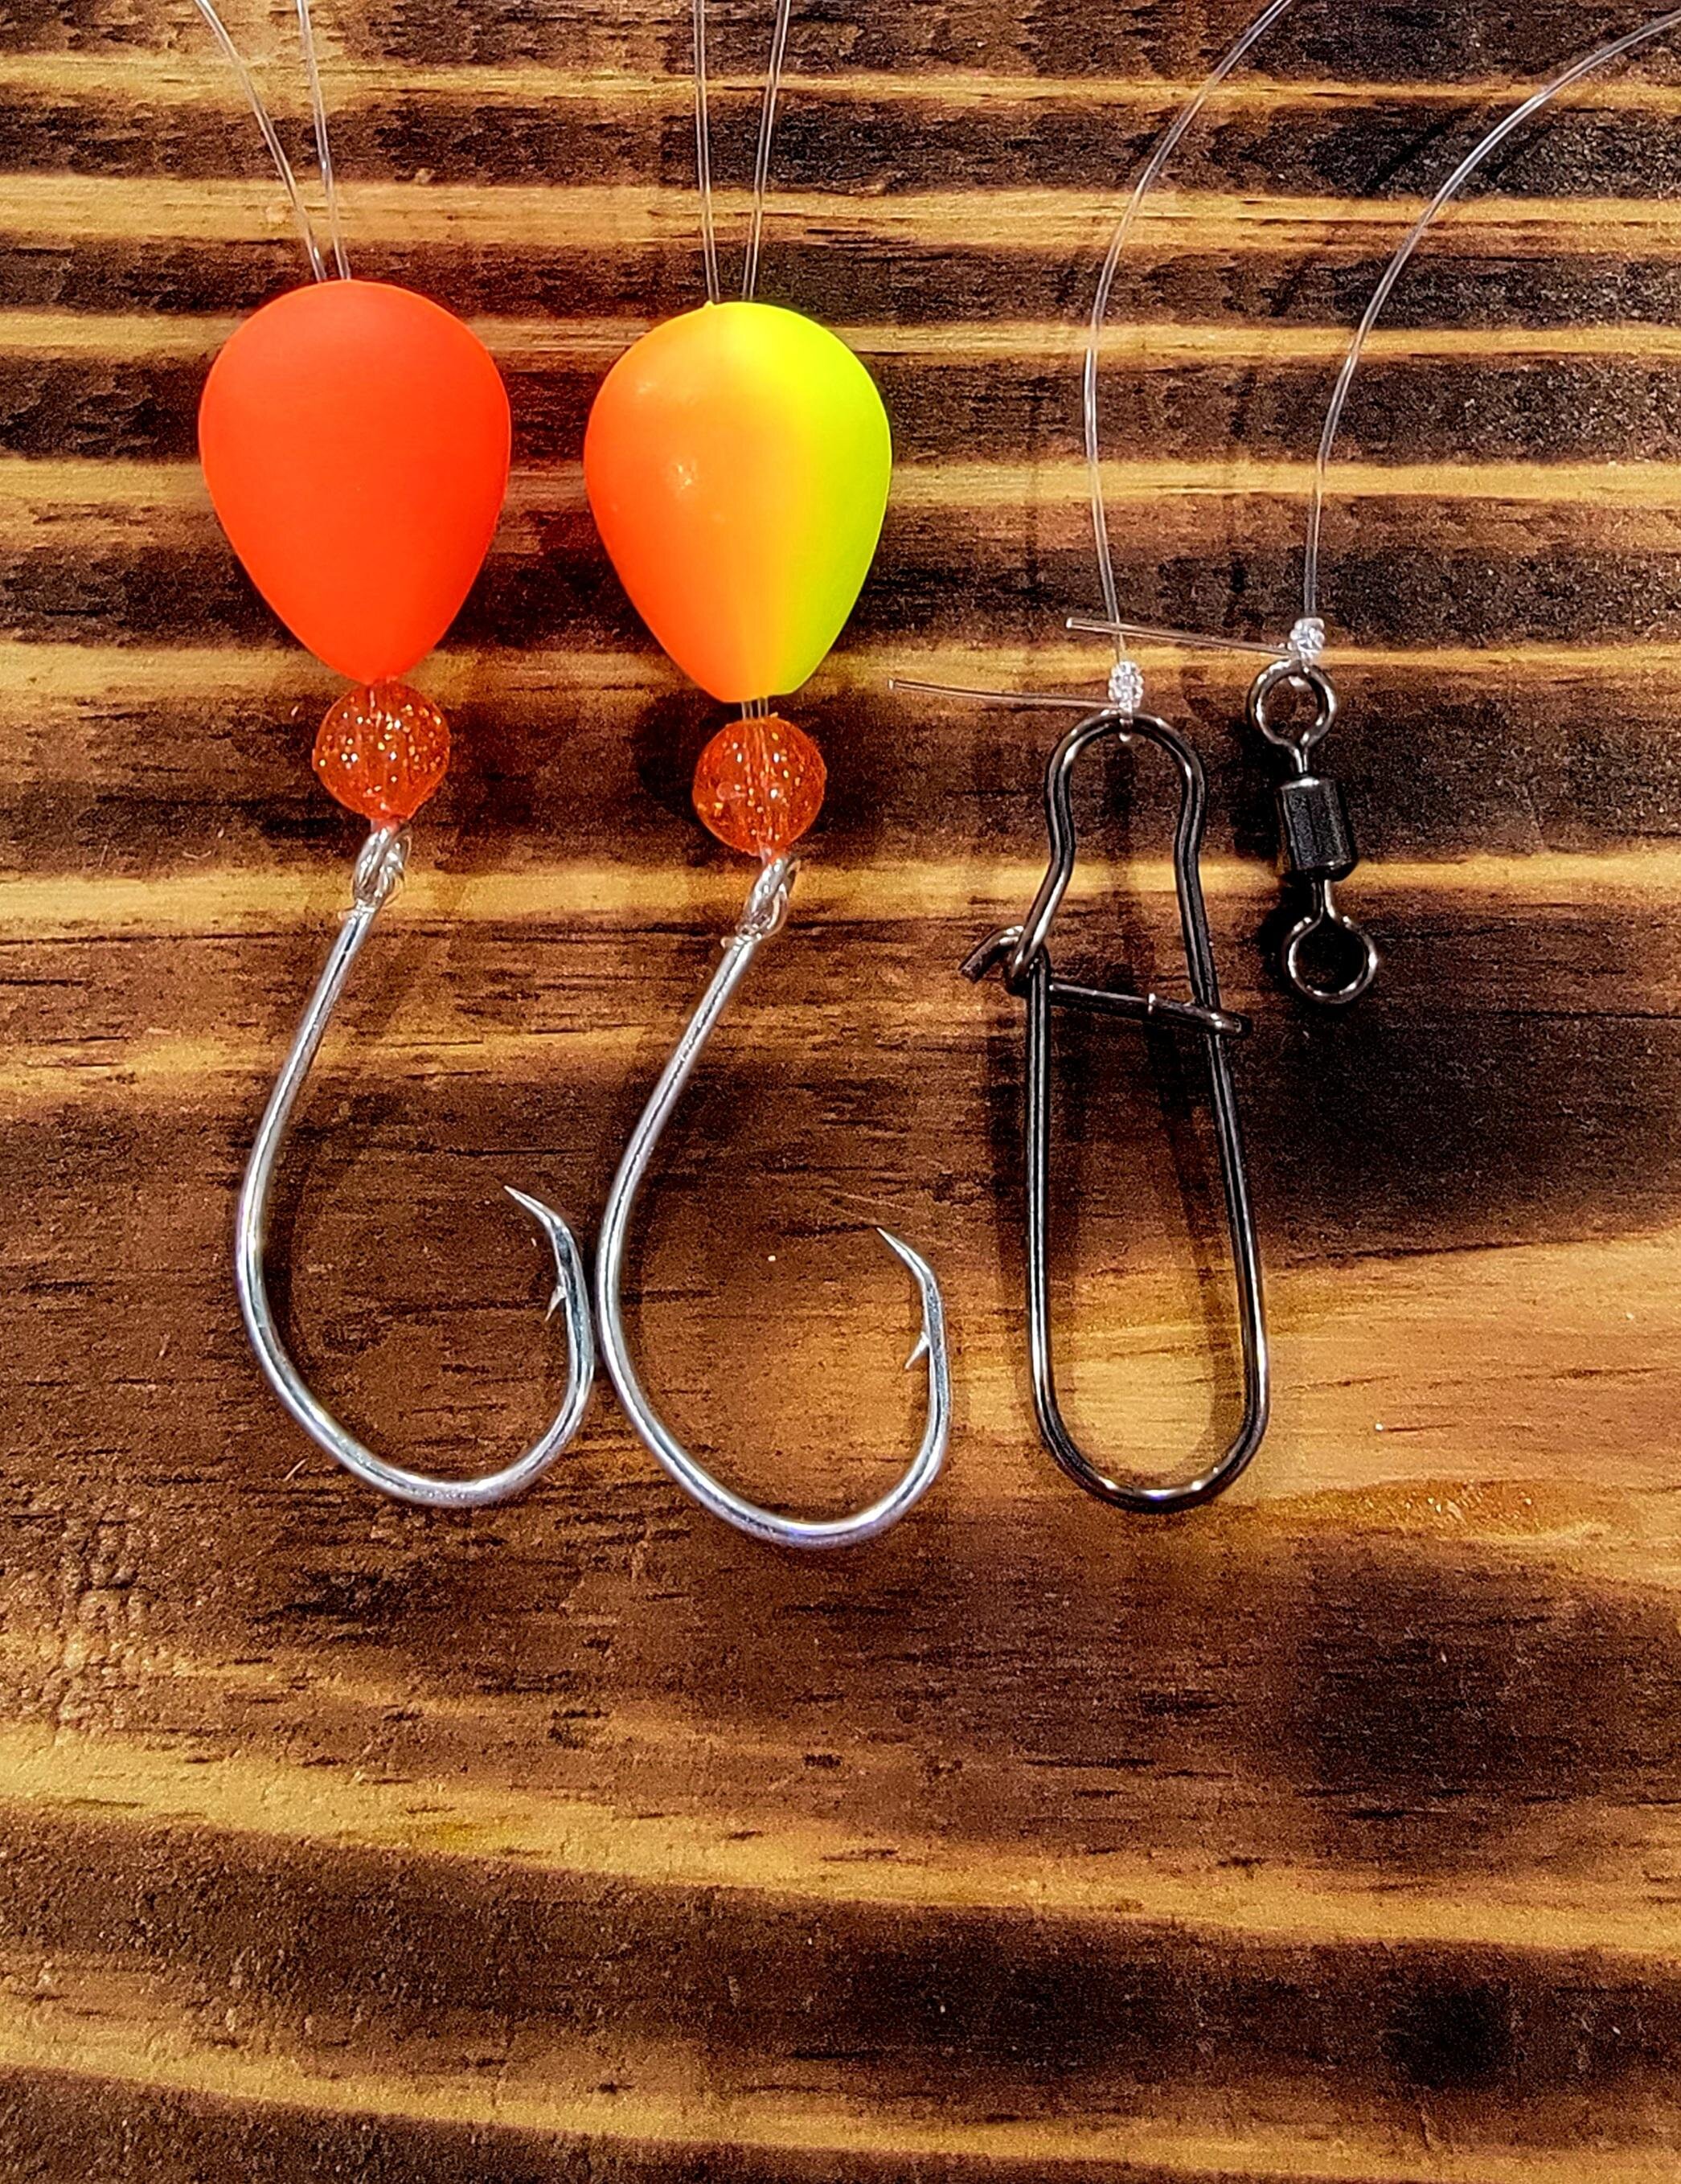 Pre-rigged Pompano Rigs - Quality Components - Strong and Rust